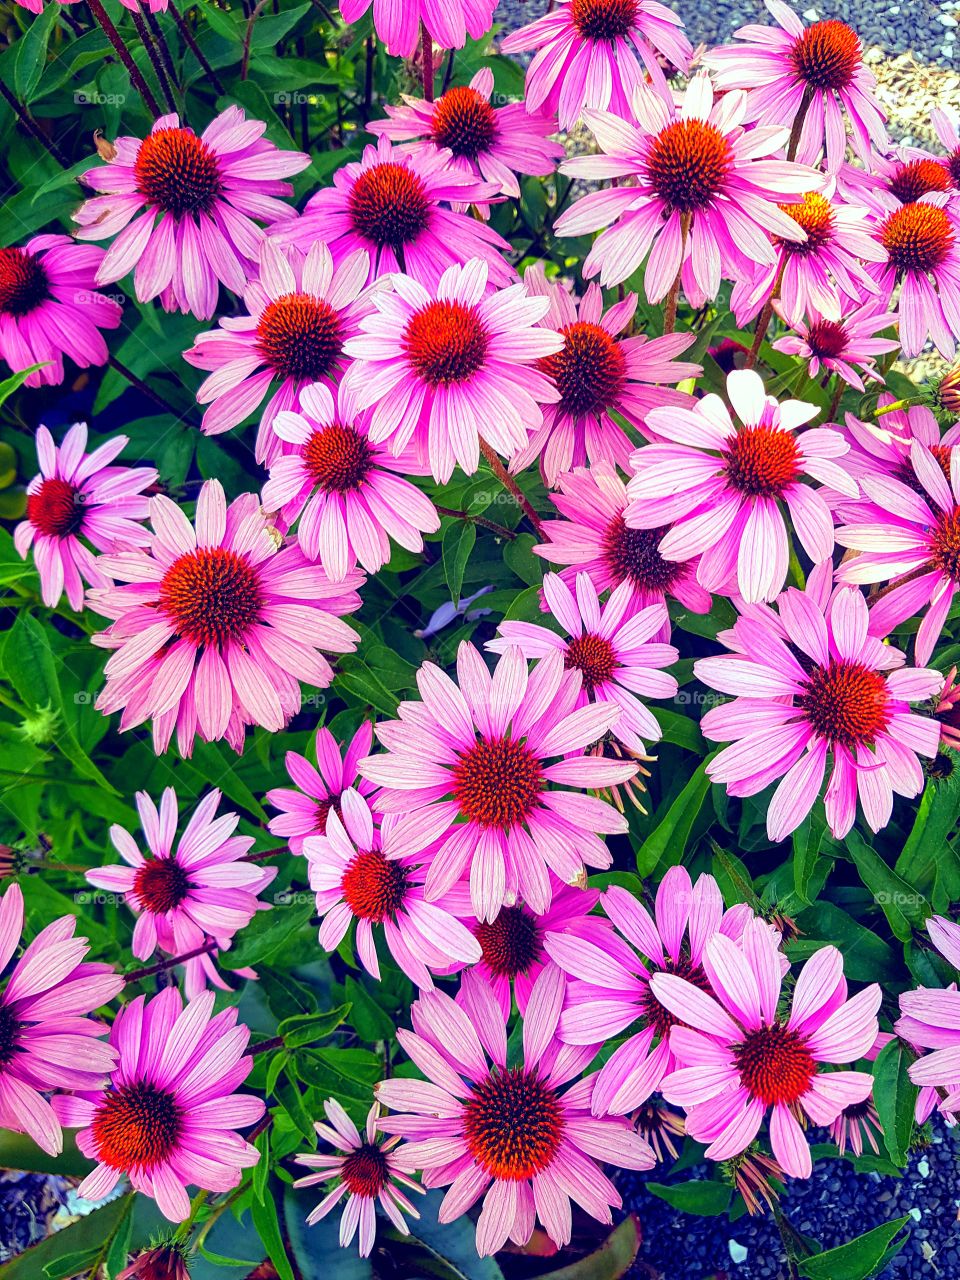 These beautiful pink daisies stopped me in my tracks I could not walk away. Just need a photo so I can share these with the world.